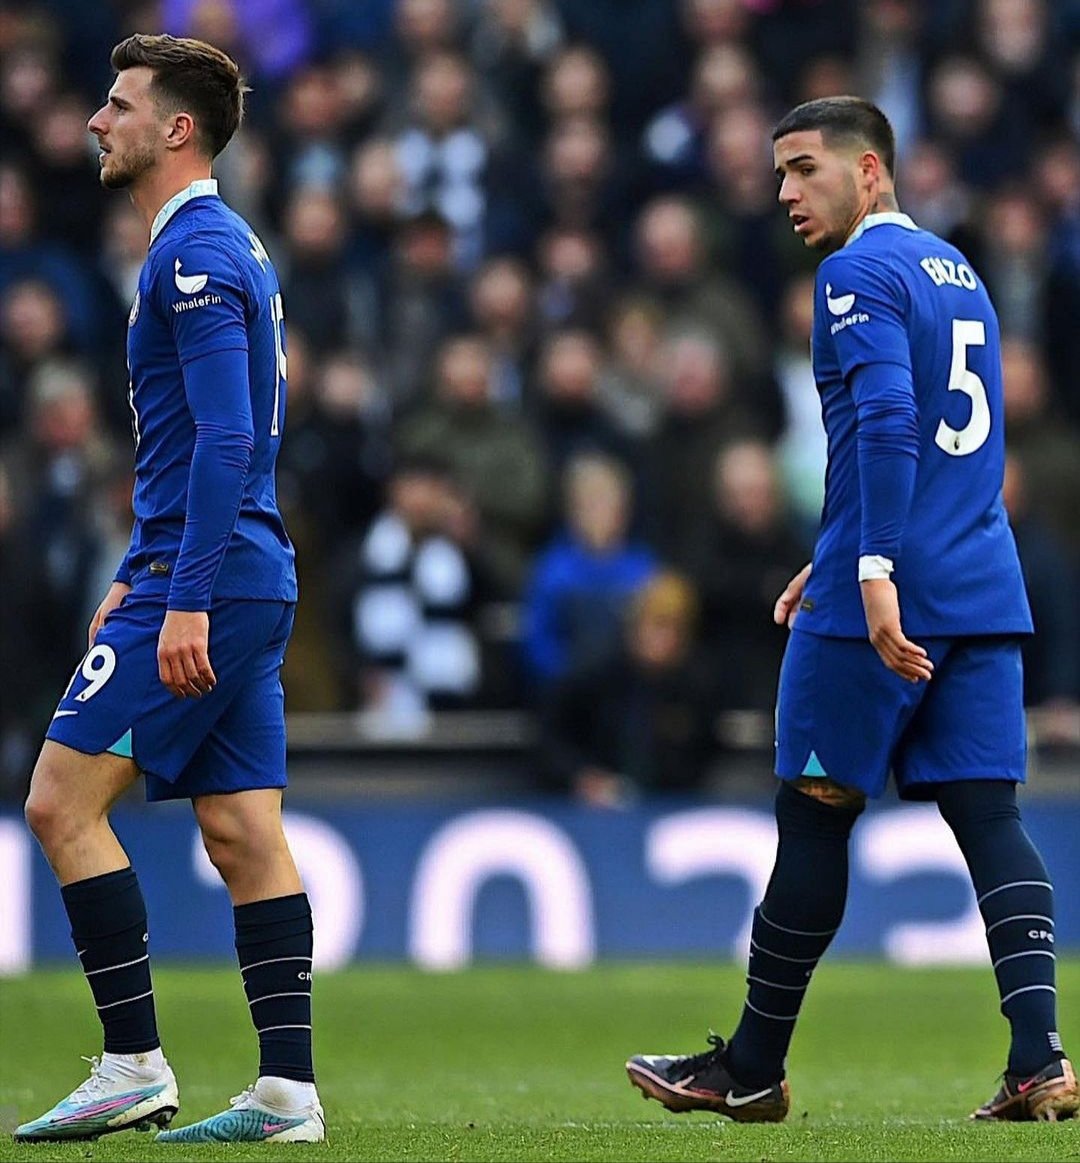 🌩 Another tough and disappointing game for Mase today 😔 #TotChe #Masonmount 😬